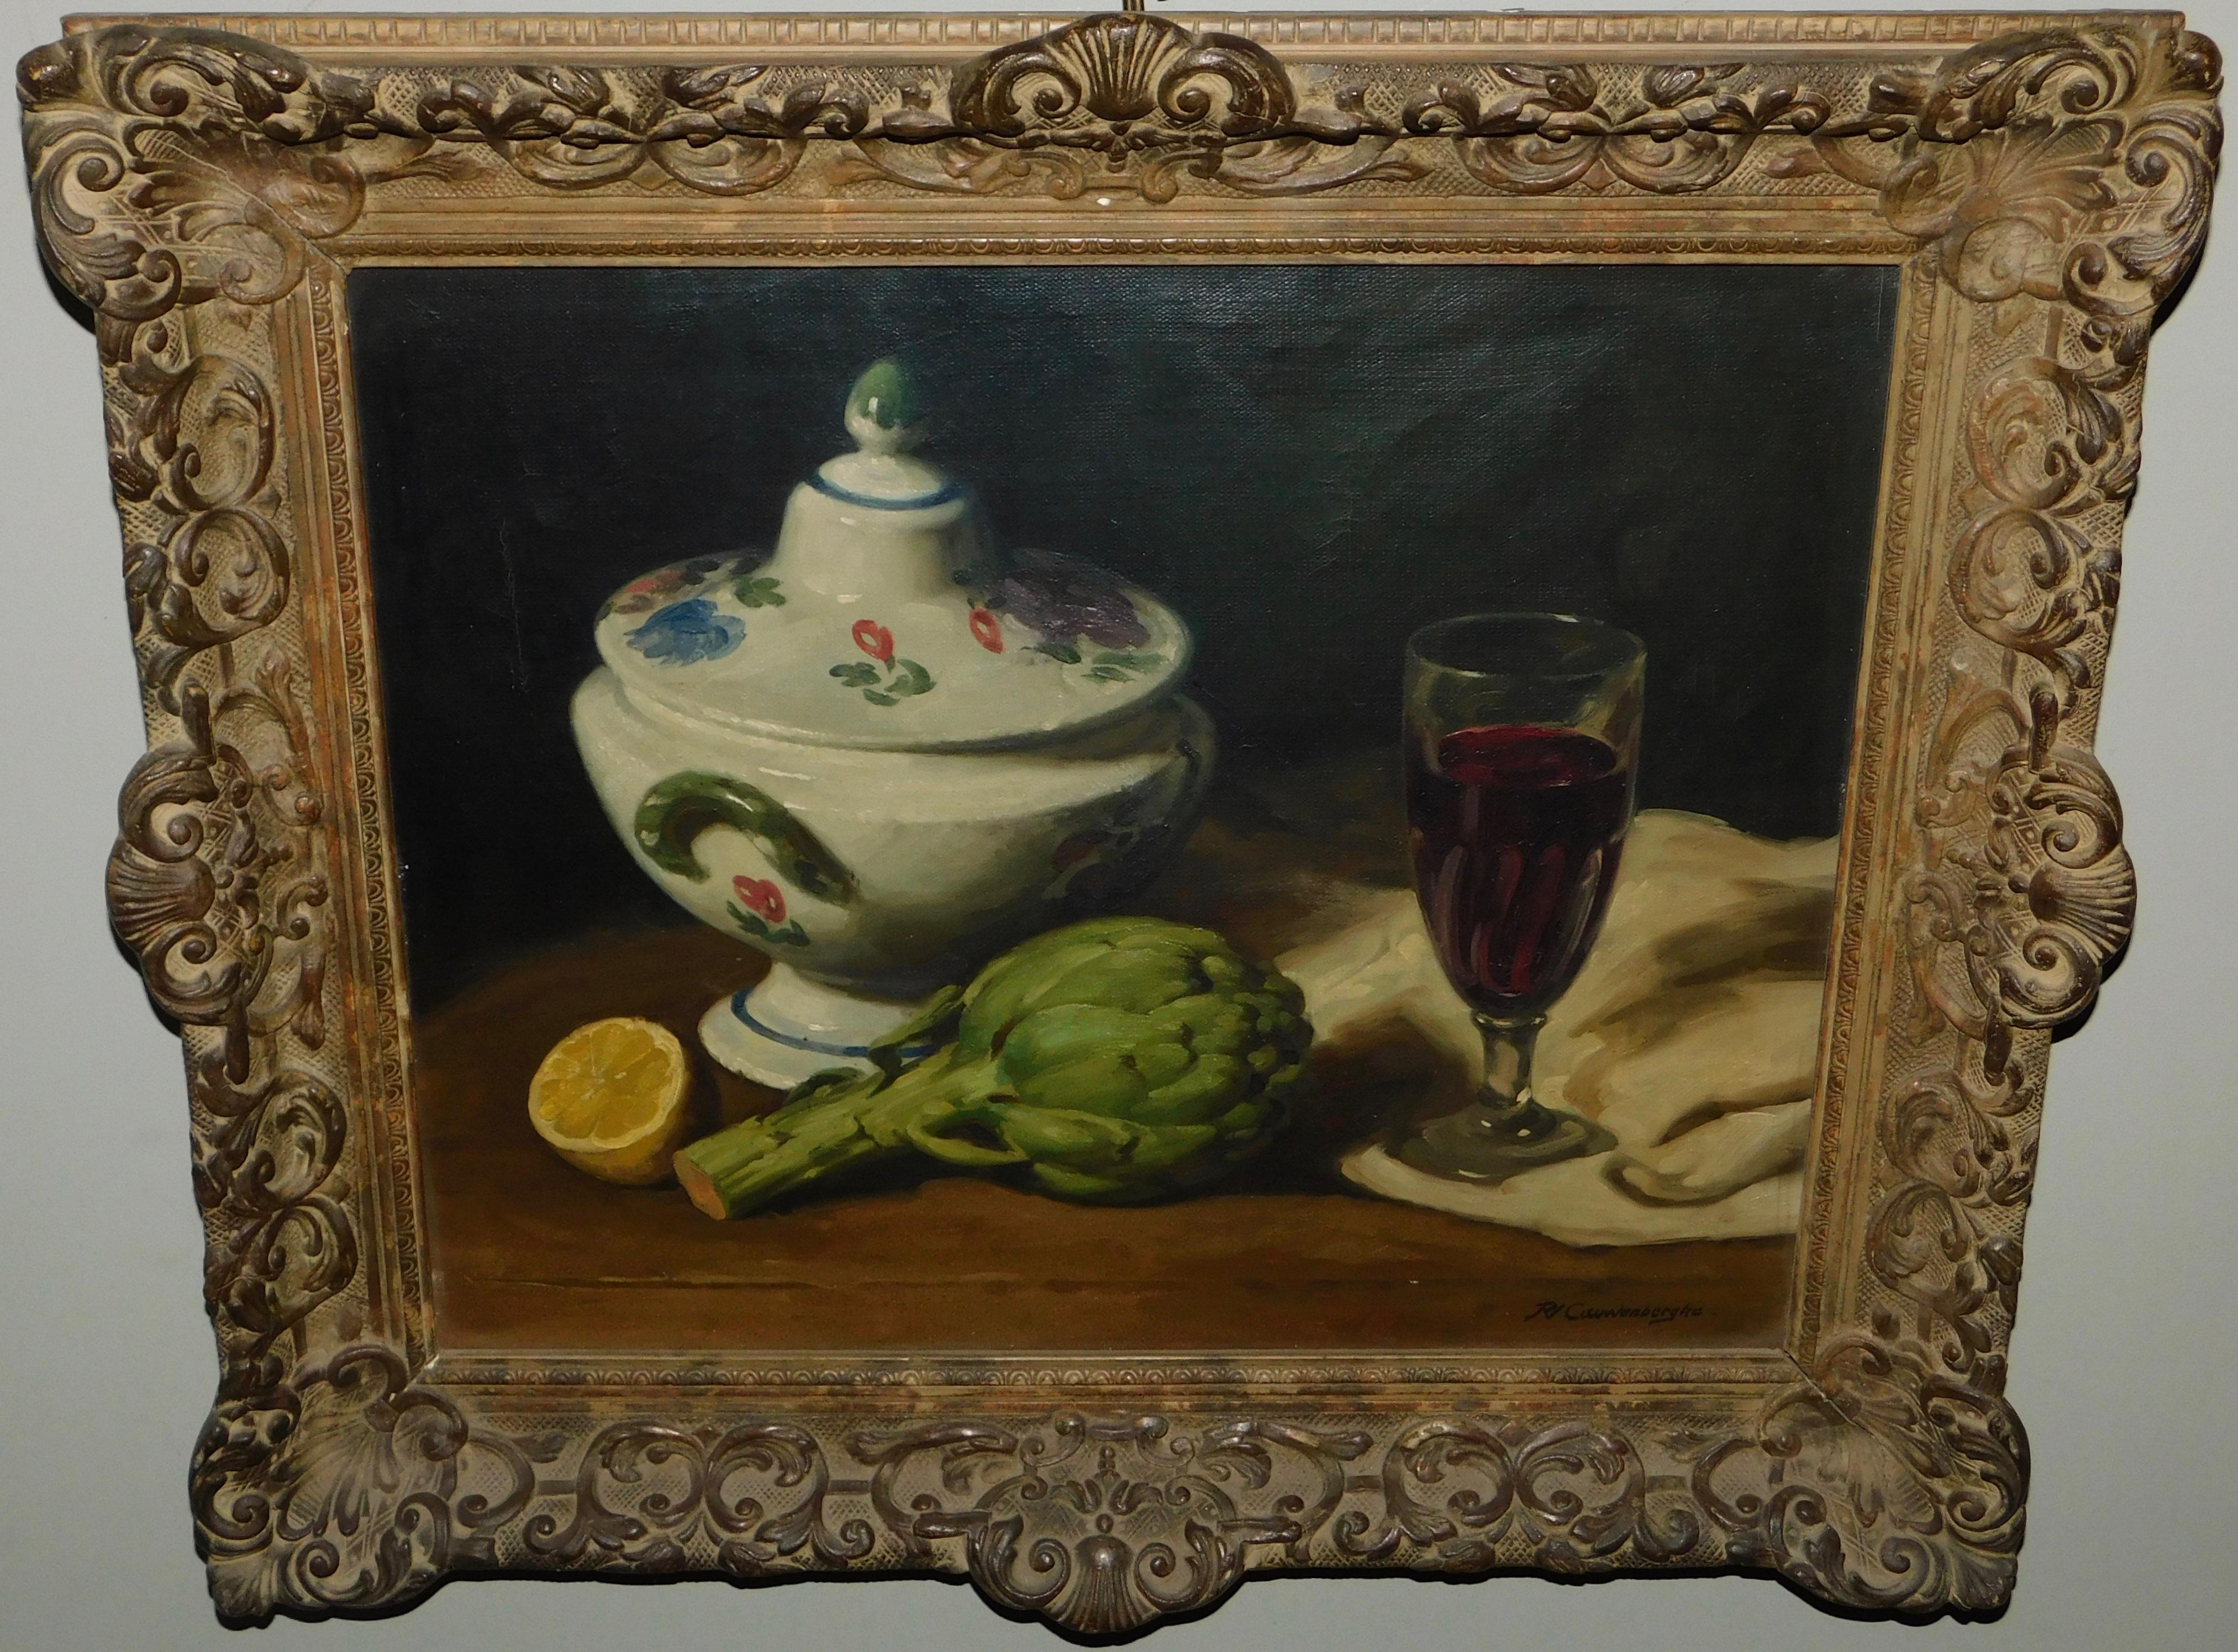 Still life oil painting on canvas by the known Belgian still life painter Robert Van Cauwenberghe, circa 1930. Original frame of wood with gesso decoration and limed gold leaf finish
(Cauwenberghe was known for using this frame on his still life